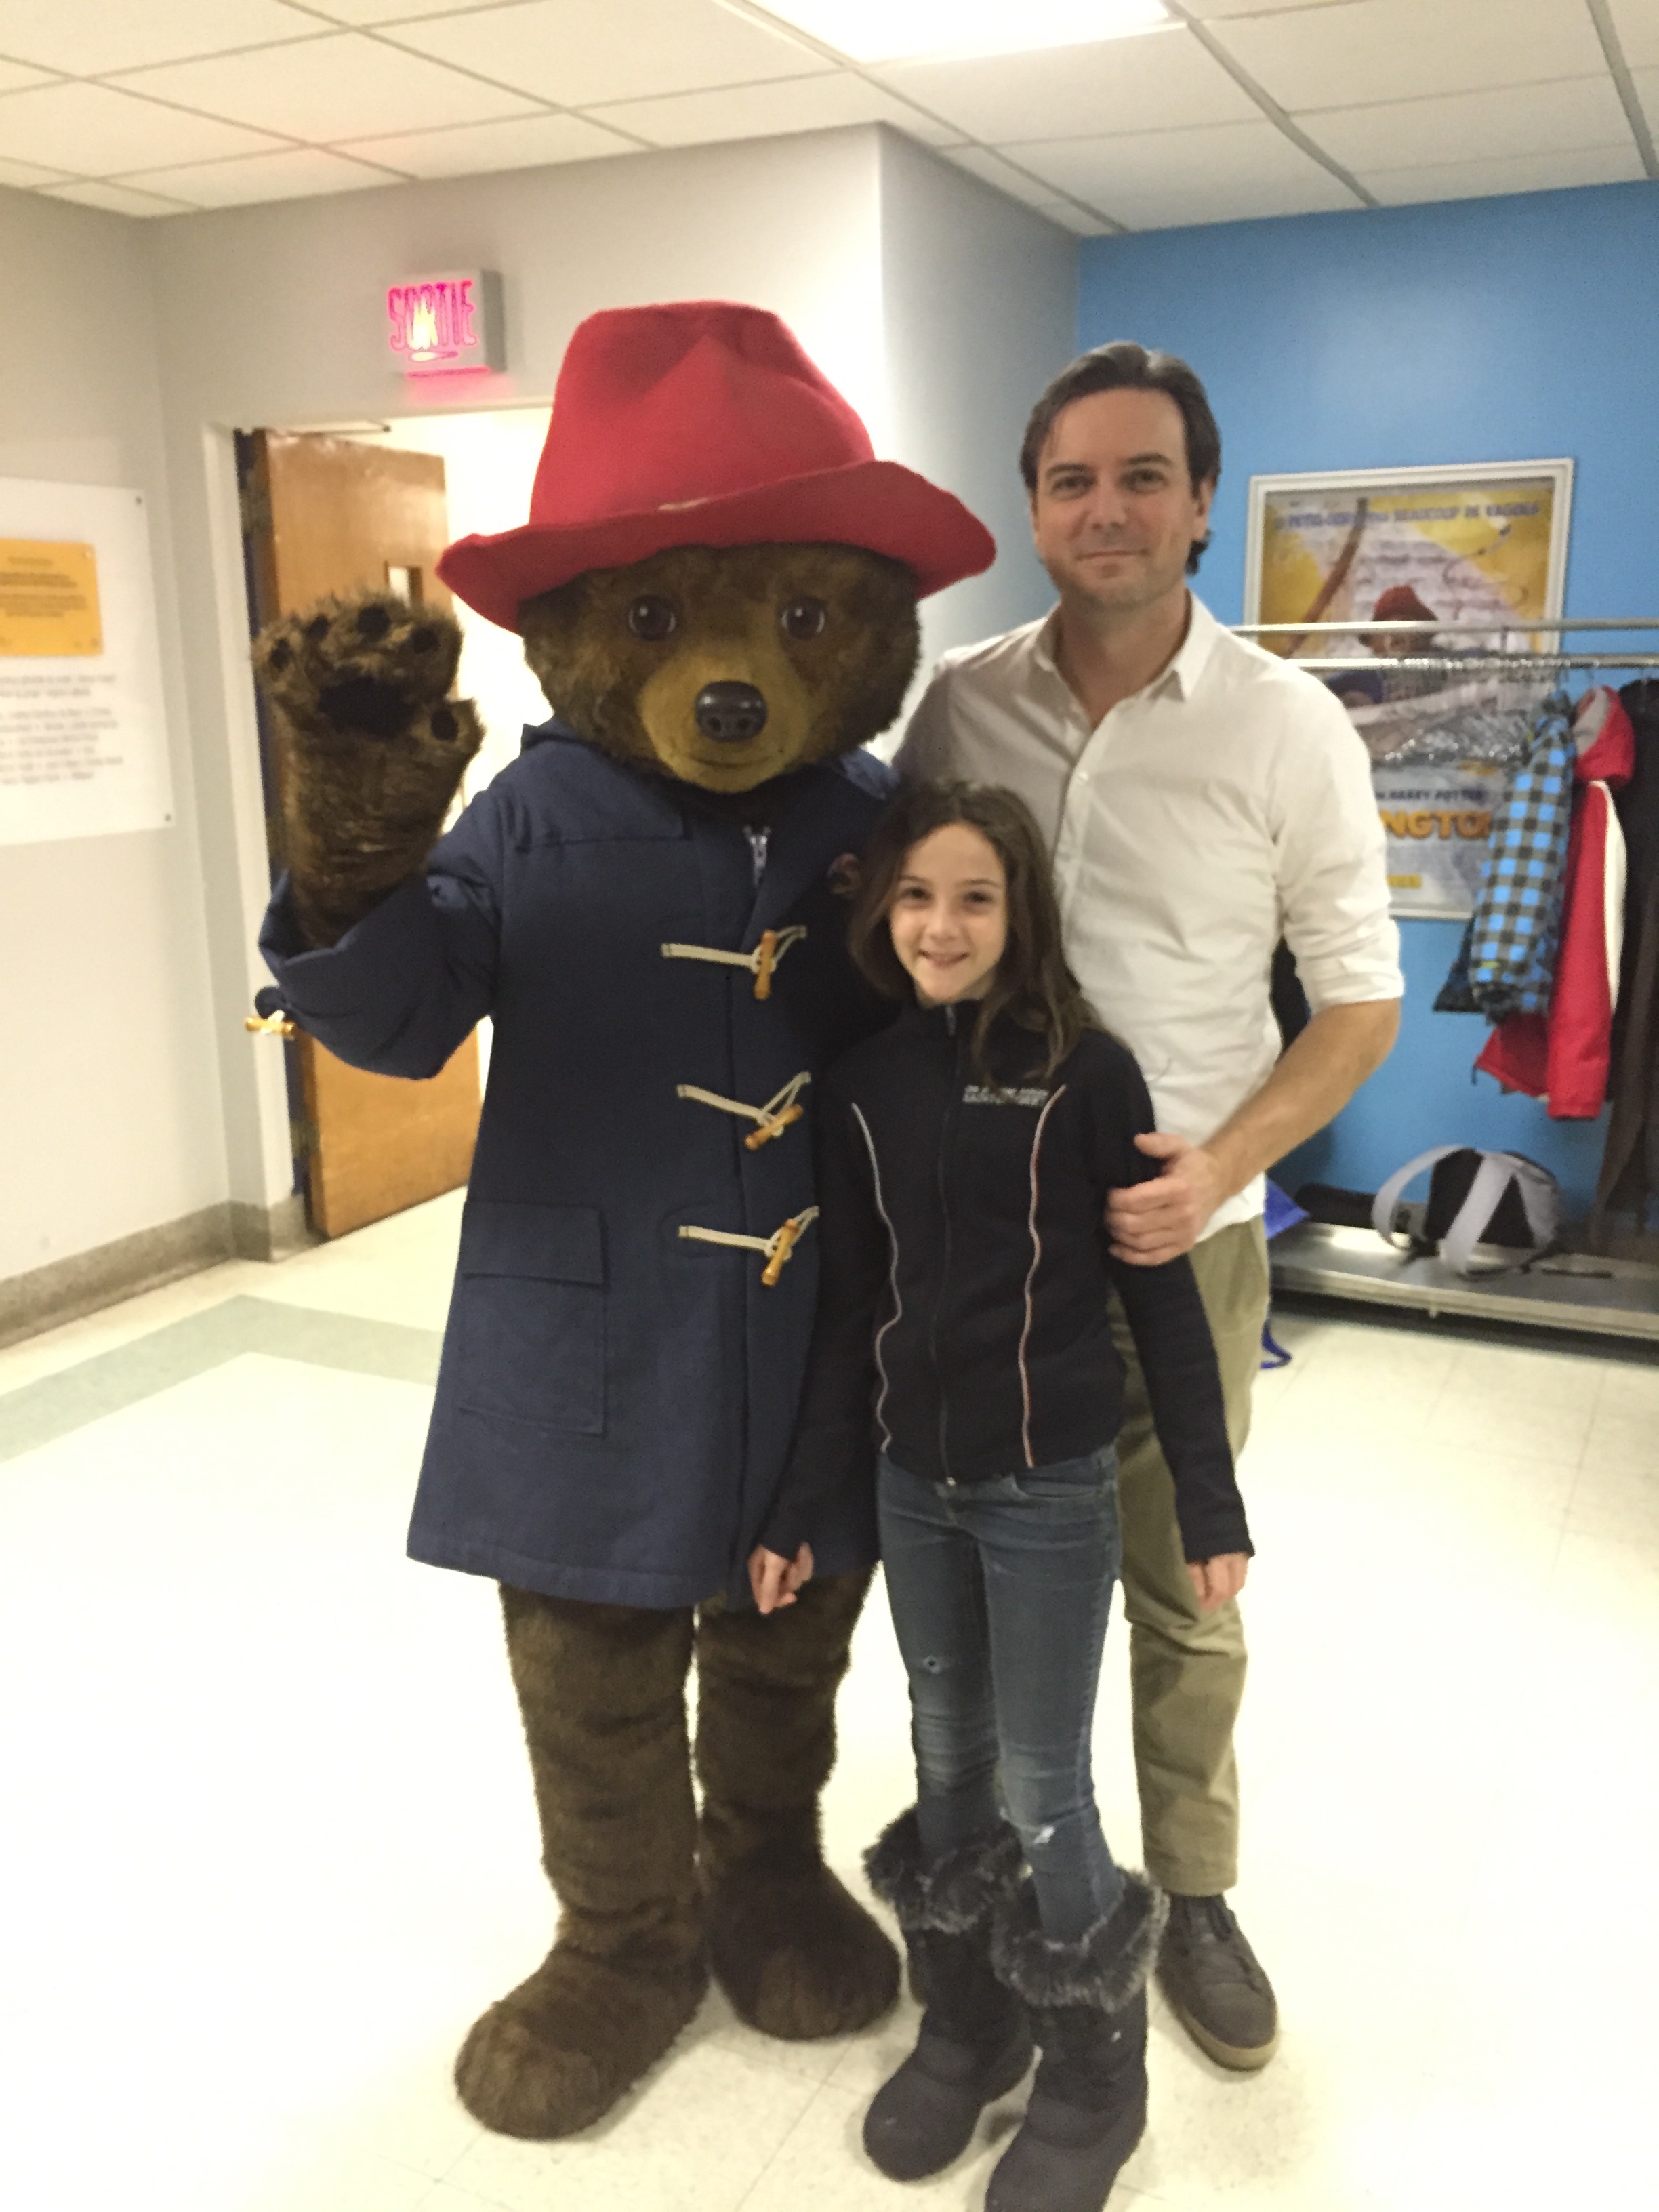 With the famous Paddington and Paulane Touchette, watching the movie with sick children at the Montreal CHUM. Thank you all for this amazing opportunity to share this movie with parents and families.